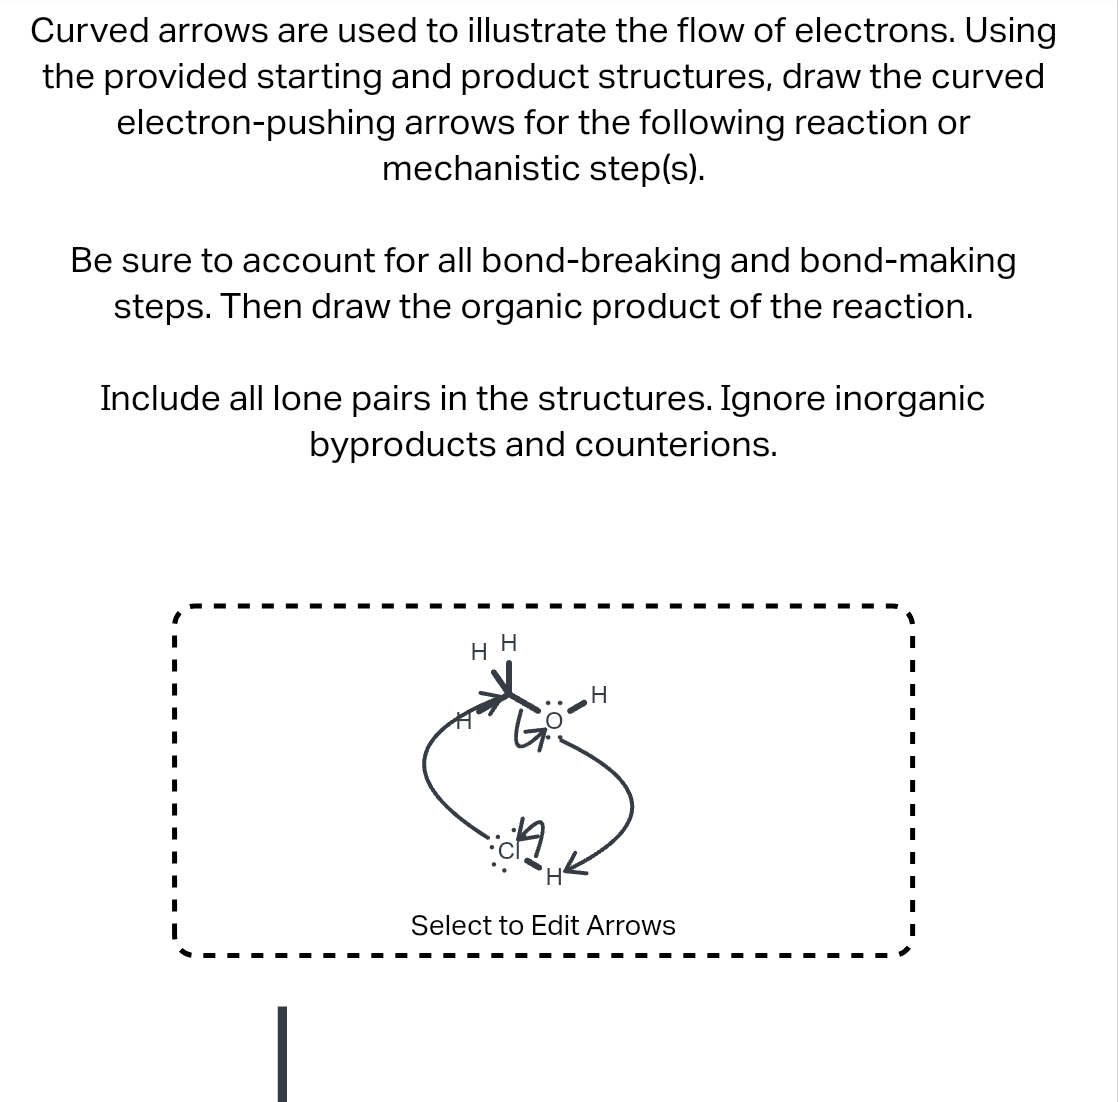 Curved arrows are used to illustrate the flow of electrons. Using
the provided starting and product structures, draw the curved
electron-pushing arrows for the following reaction or
mechanistic step(s).
Be sure to account for all bond-breaking and bond-making
steps. Then draw the organic product of the reaction.
Include all lone pairs in the structures. Ignore inorganic
byproducts and counterions.
HH
H
Select to Edit Arrows